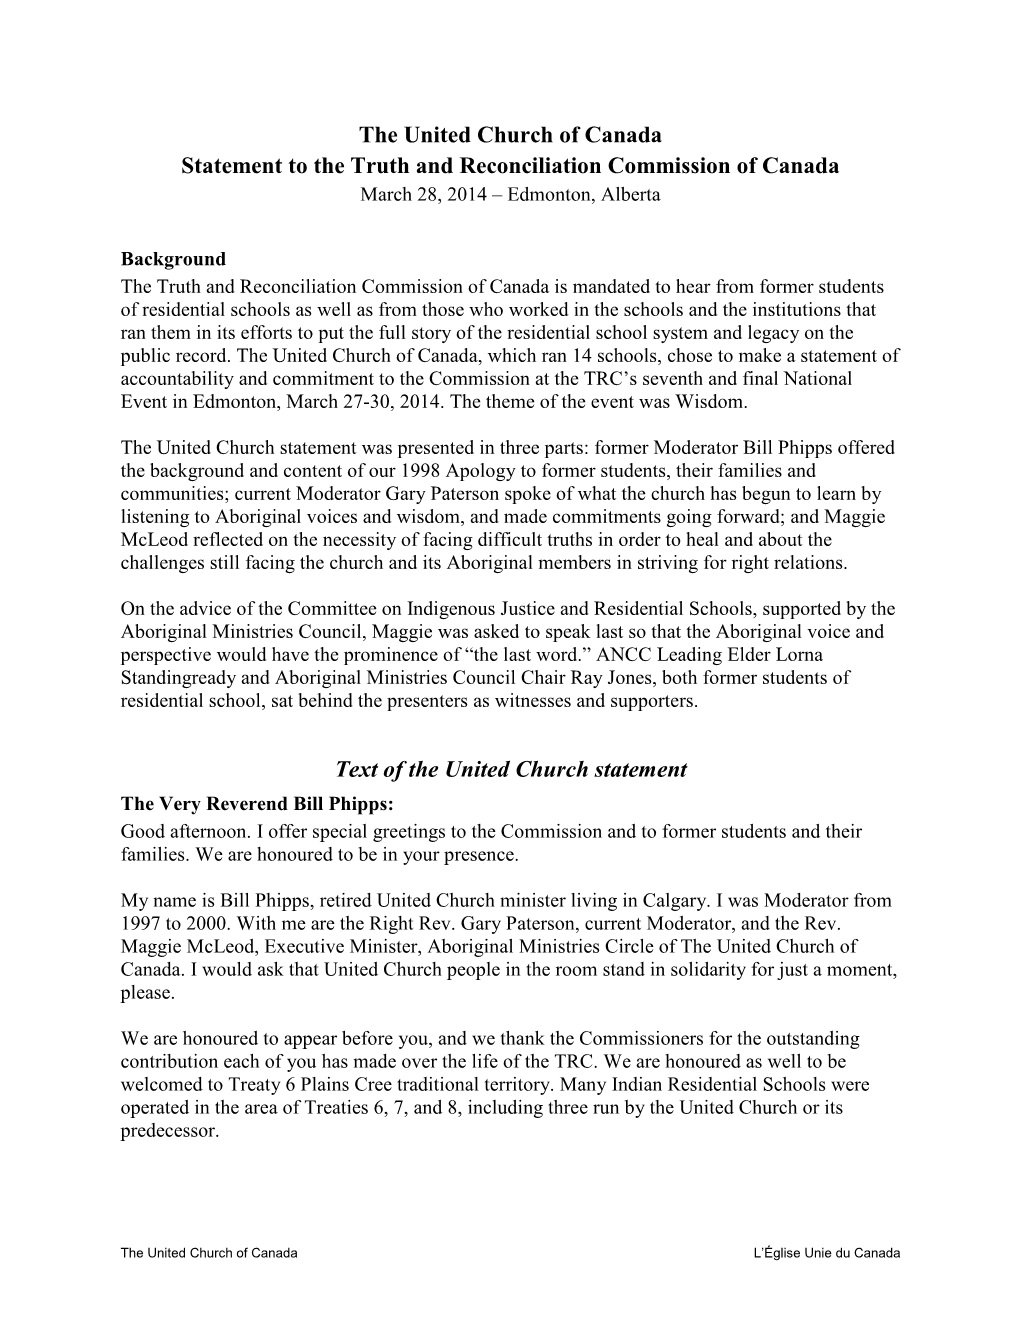 Statement to the Truth and Reconciliation Commission of Canada March 28, 2014 – Edmonton, Alberta